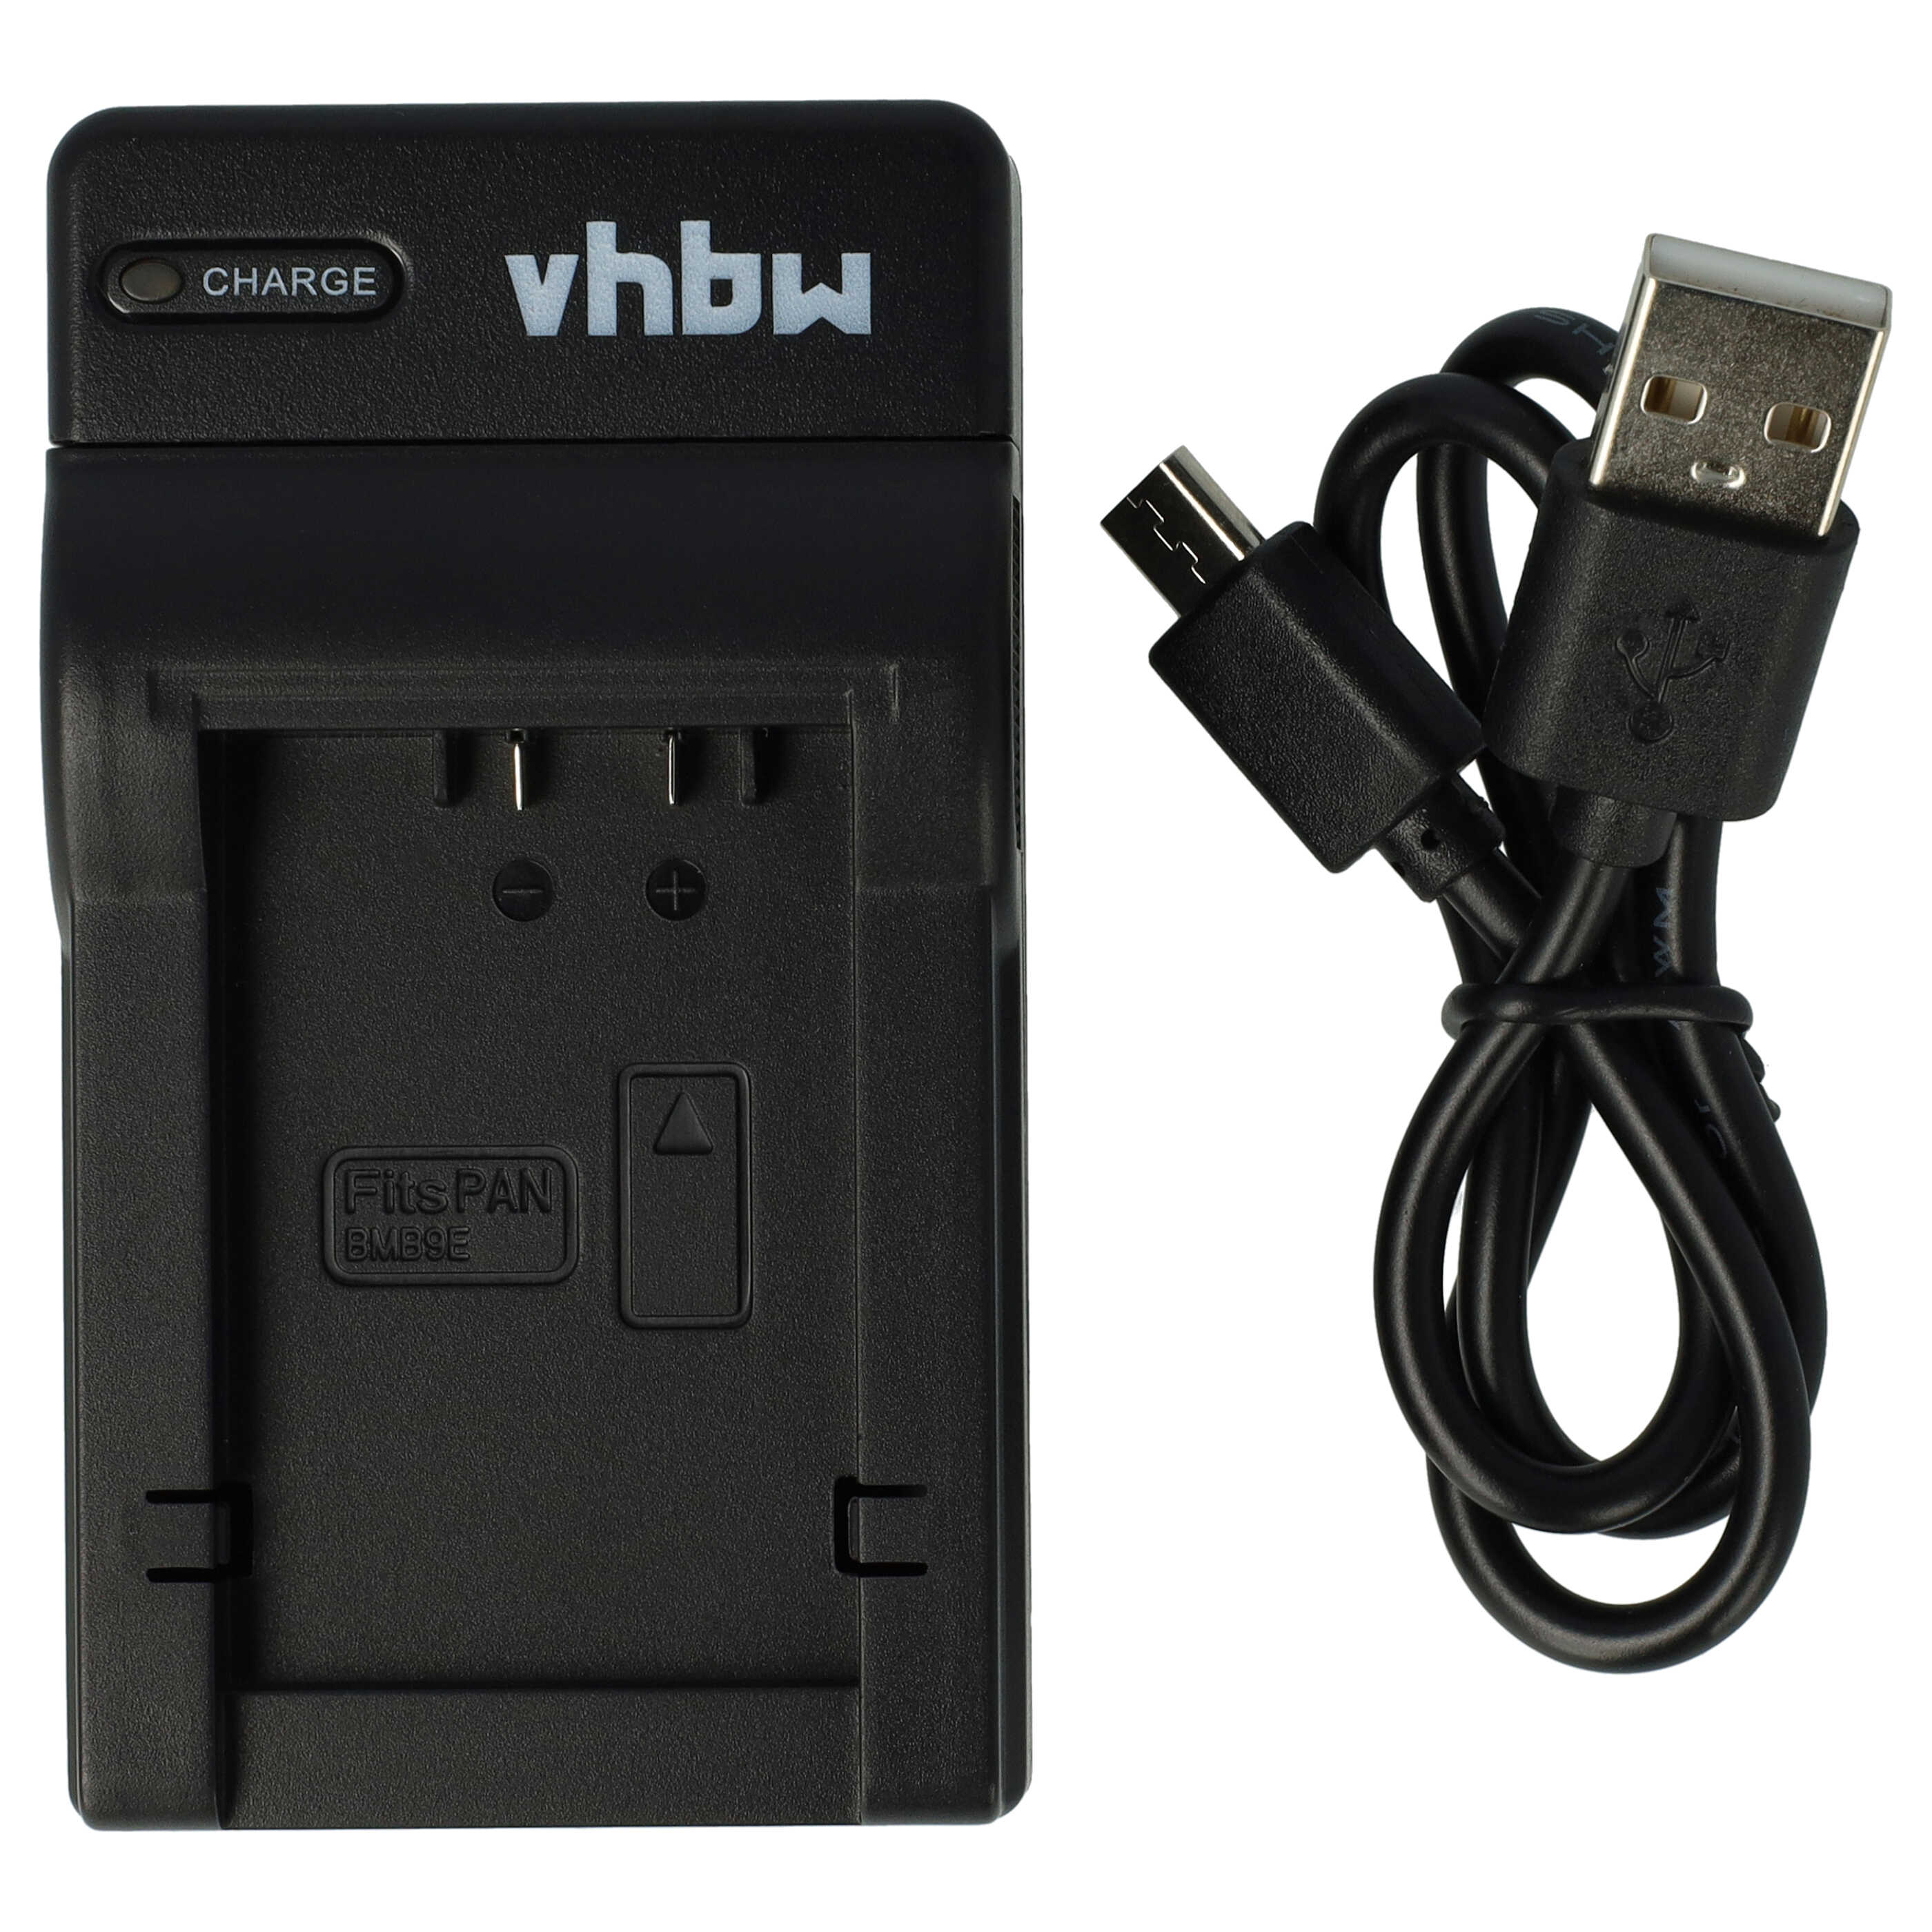 Battery Charger suitable for V-Lux 4 Camera etc. - 0.5 A, 8.4 V